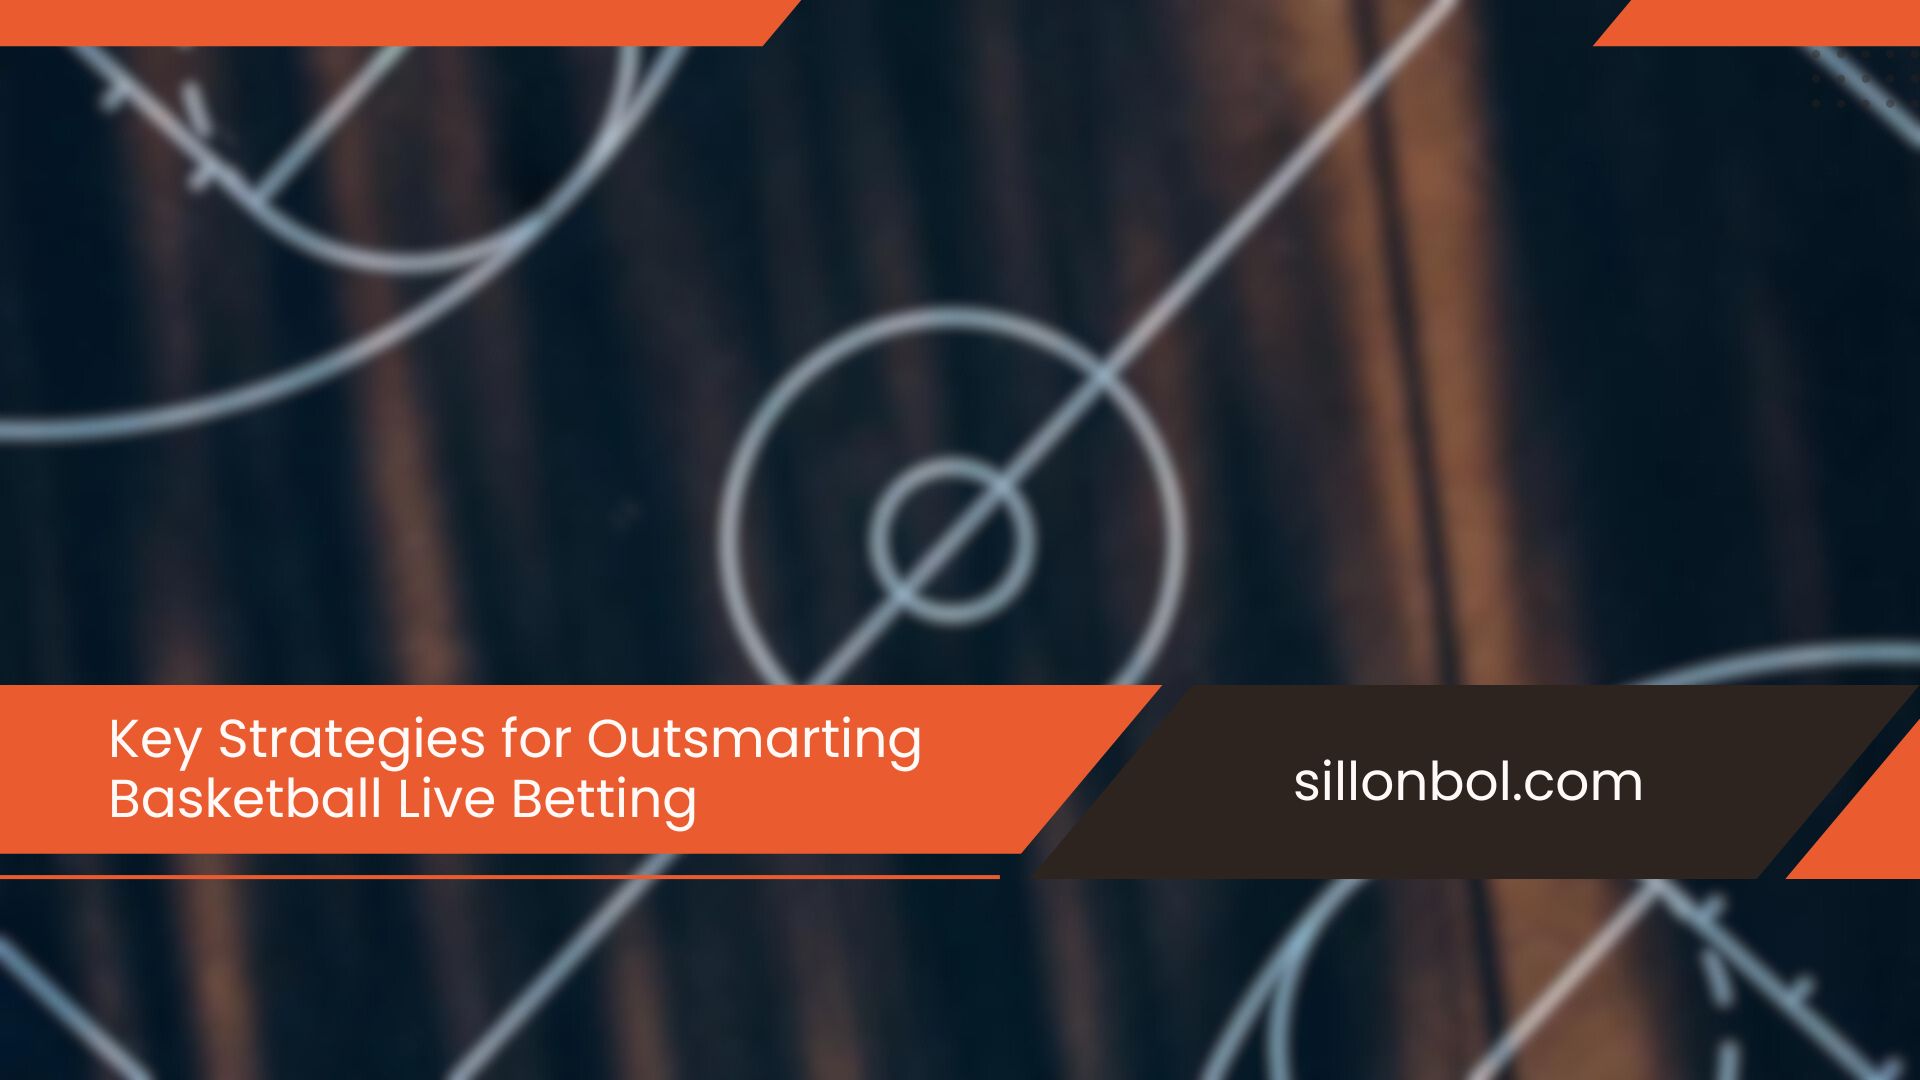 Key Strategies for Outsmarting Basketball Live Betting